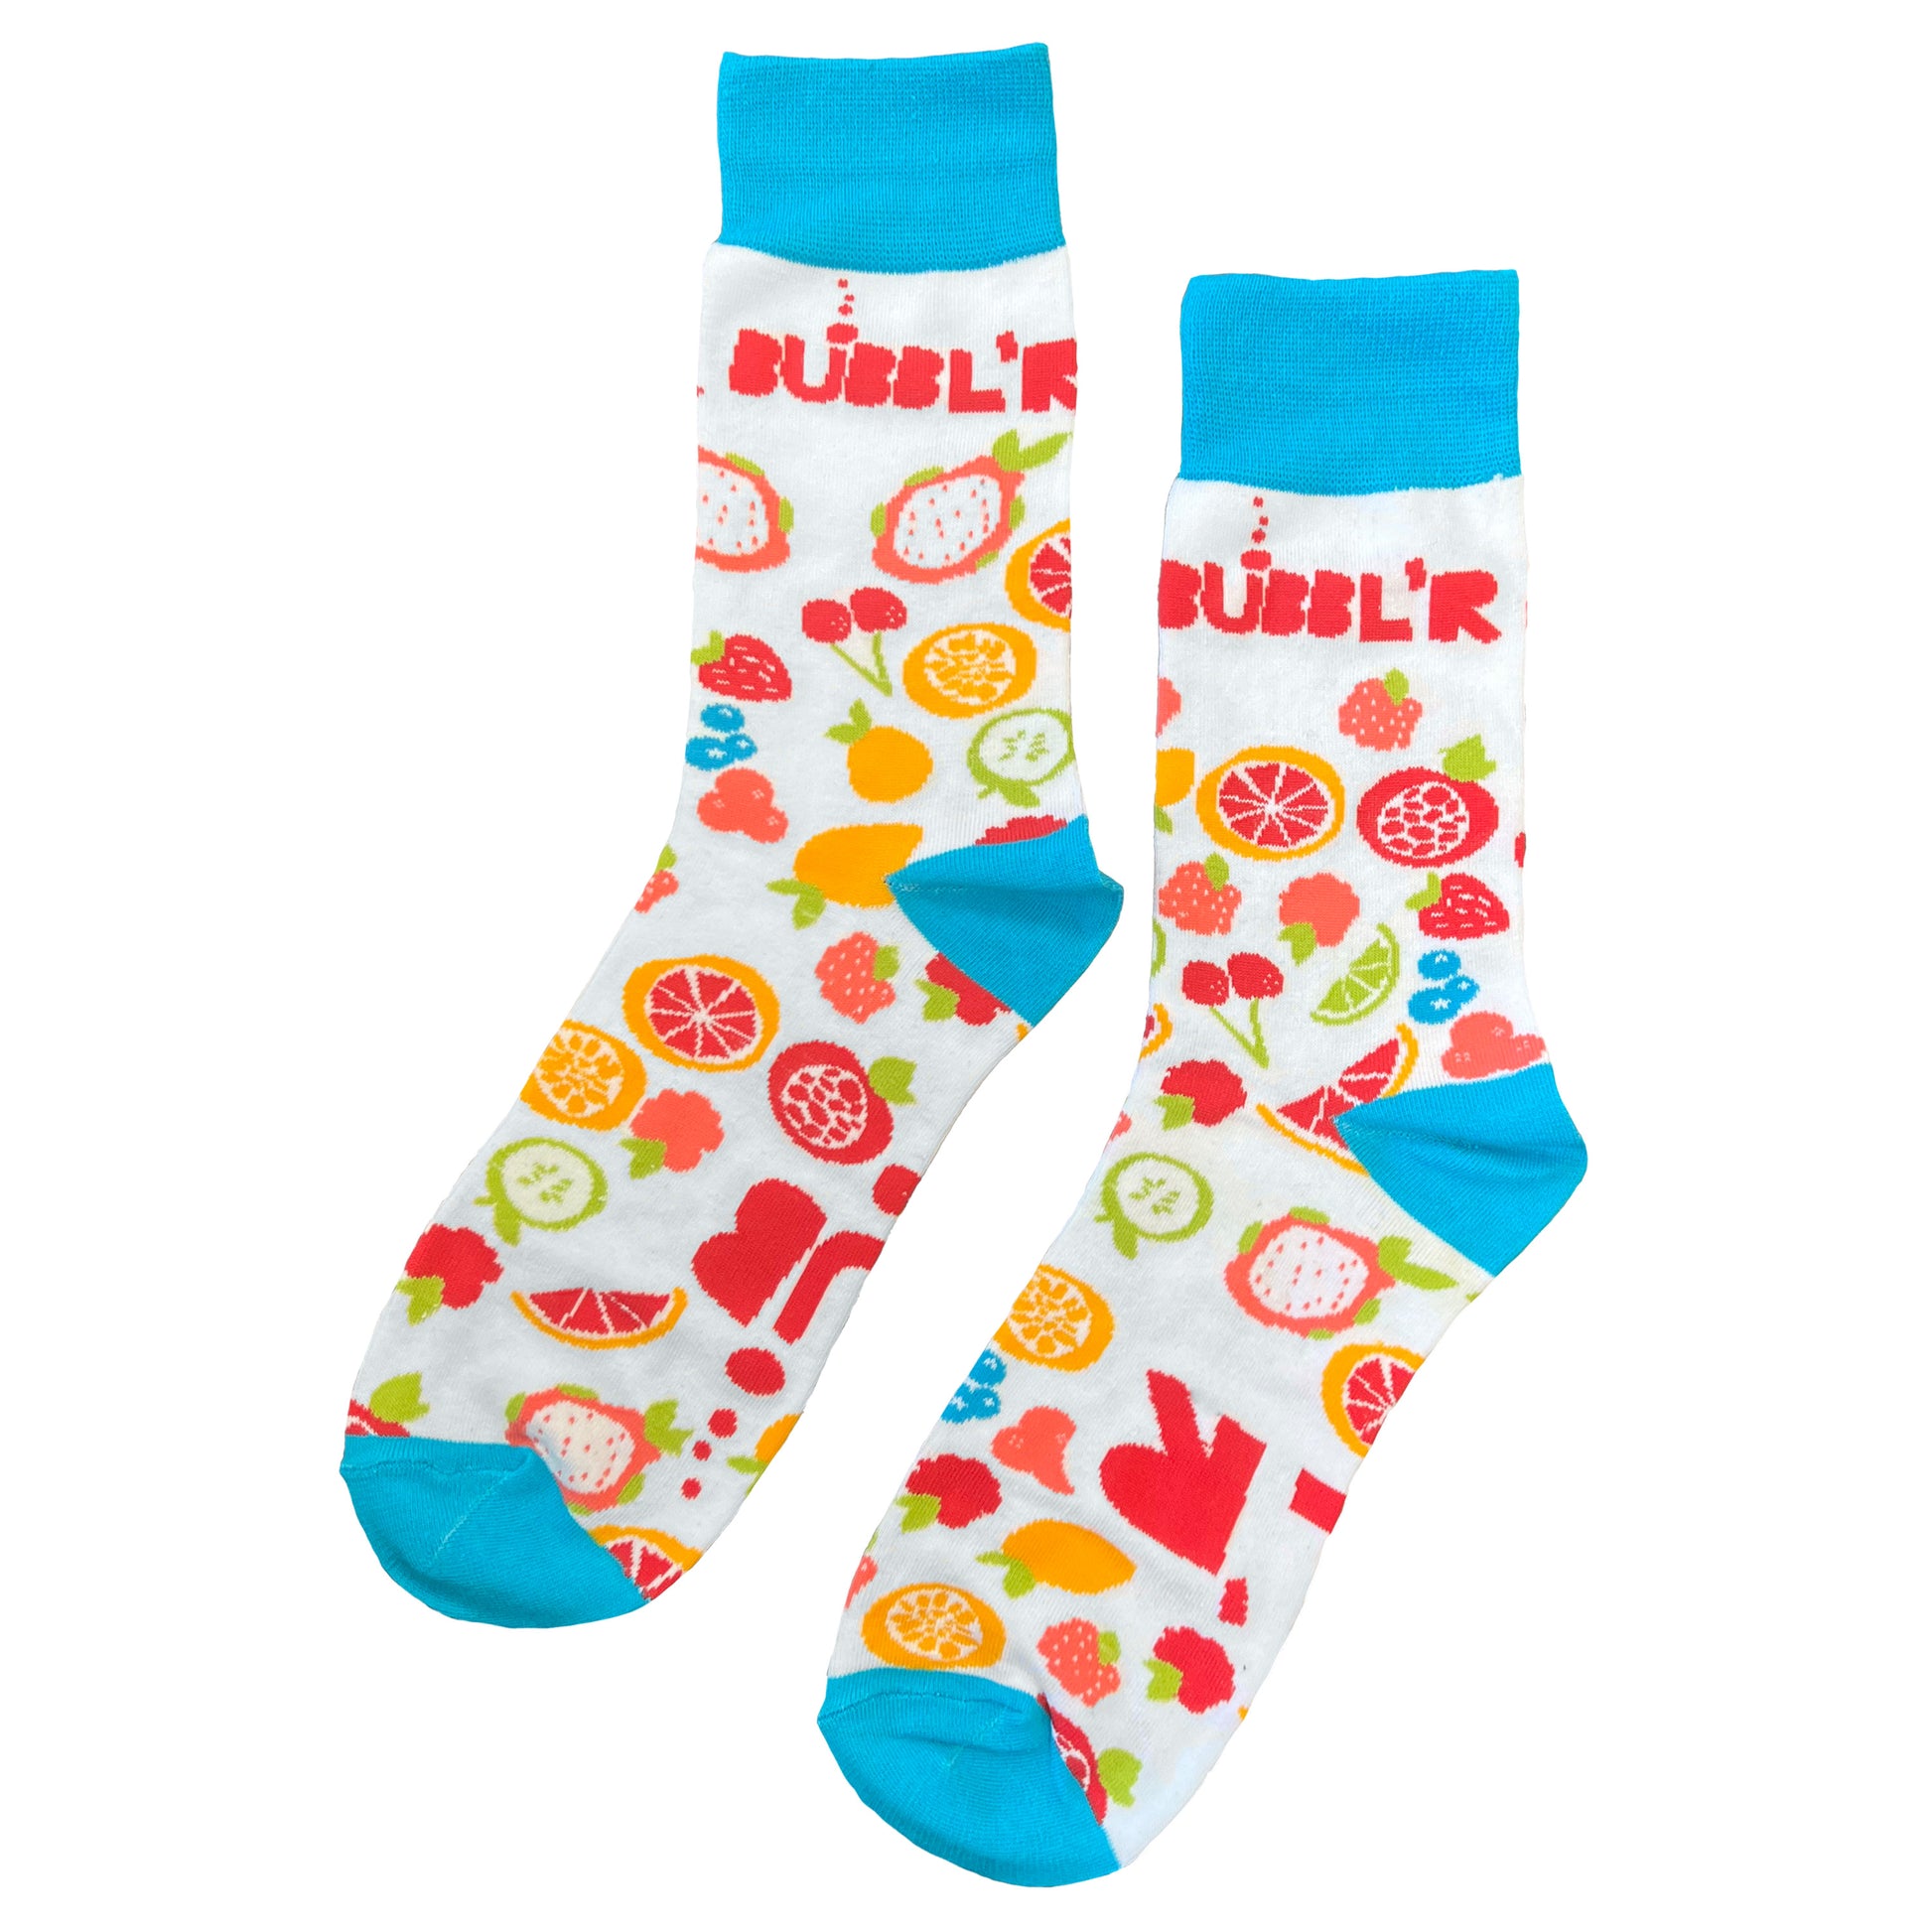 white socks with multicolor fruit pattern and red bubbl'r logo, teal cuff, heel and toes